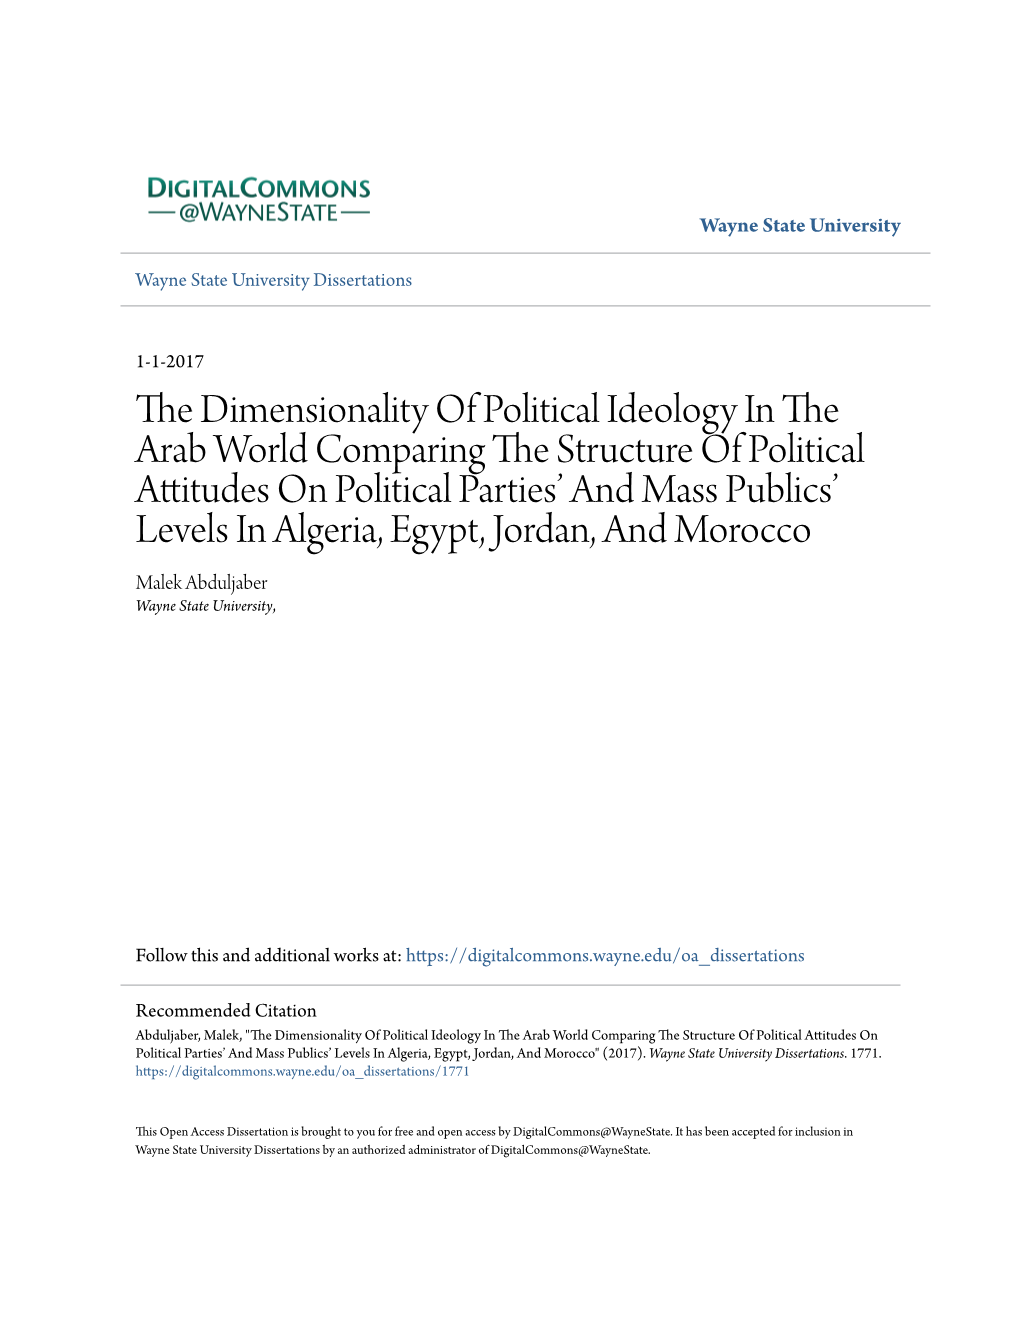 The Dimensionality of Political Ideology in the Arab World